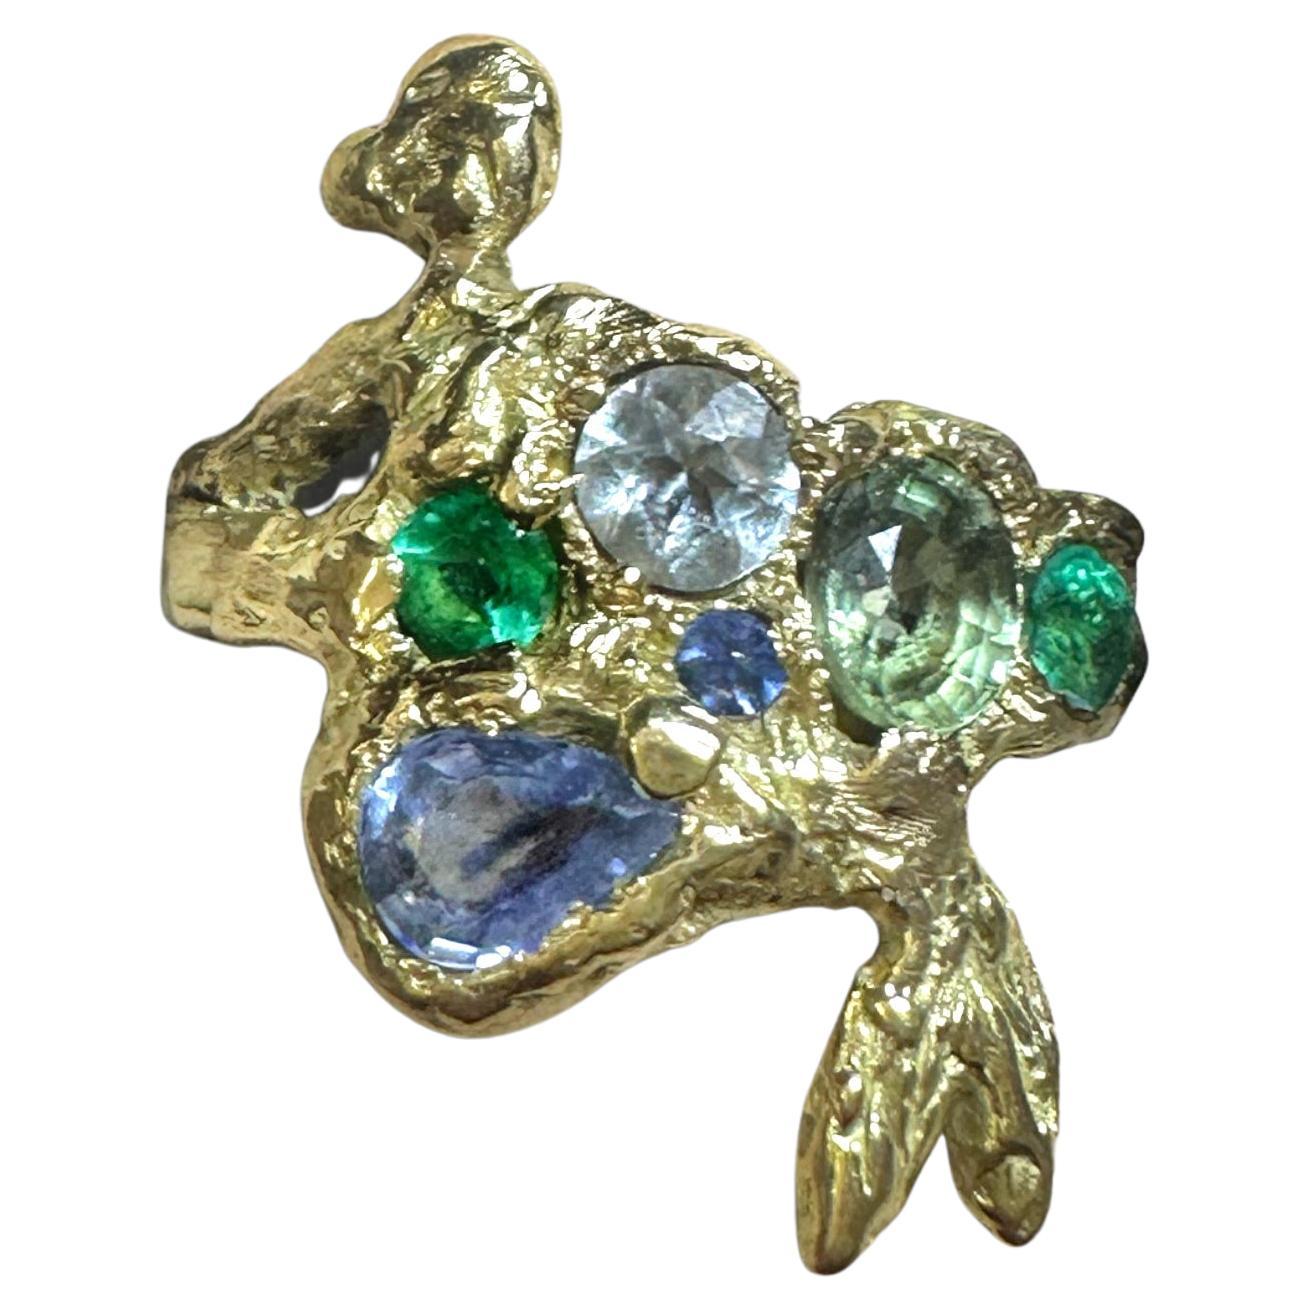 Siren Mermaid Ring with Emeralds, Sapphires, Aquamarine in Gold, in stock